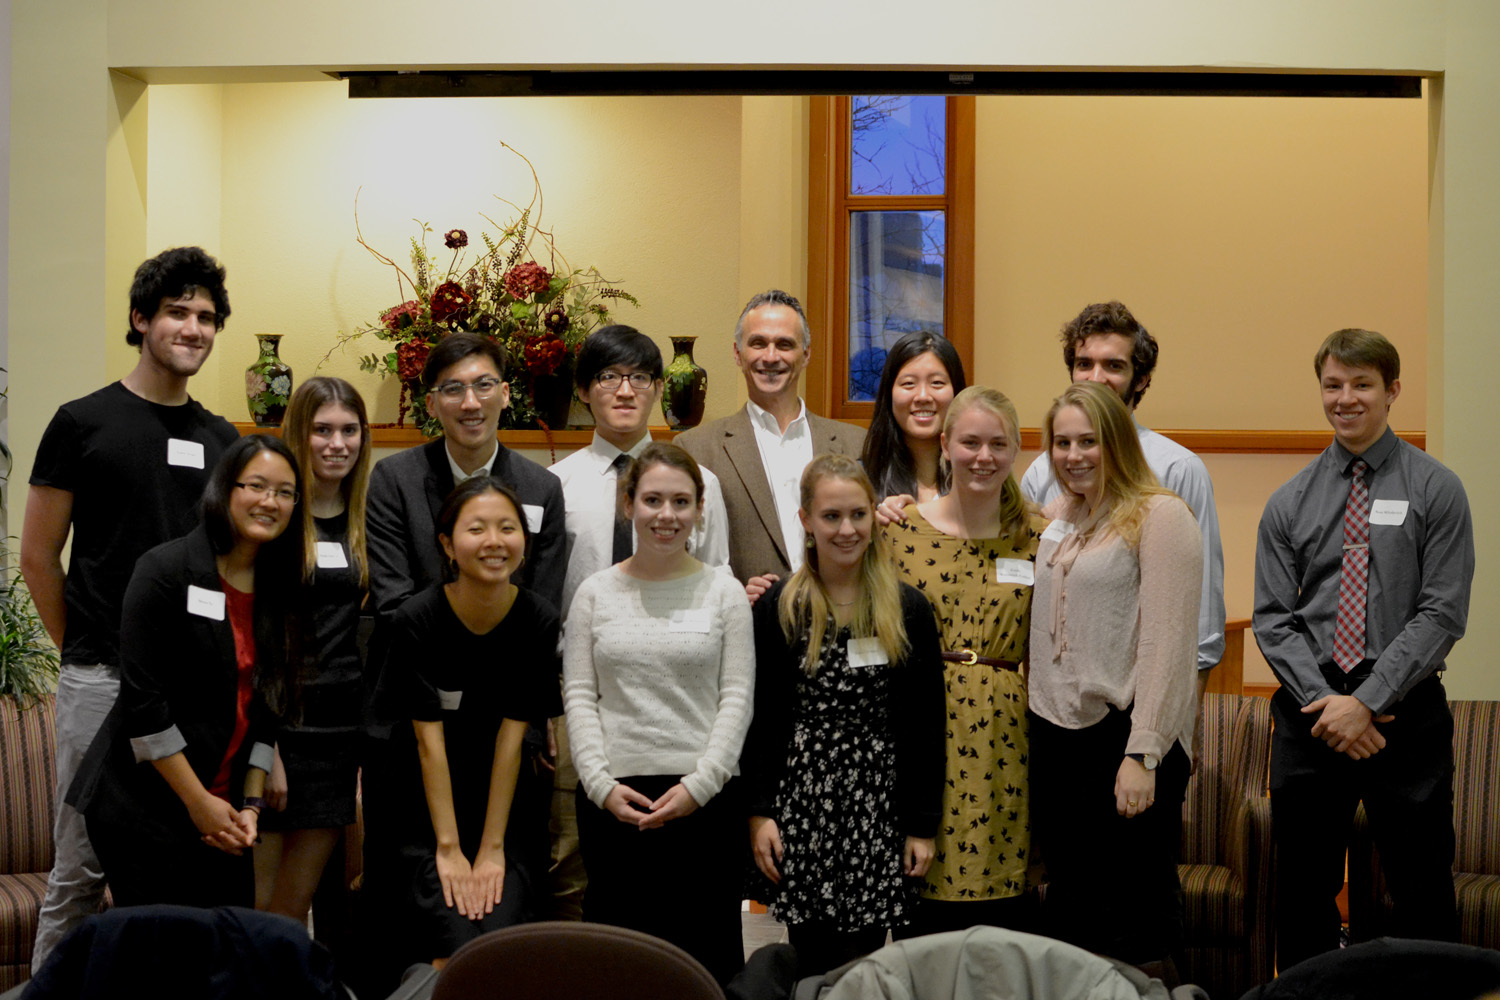 Fifteen students were inducted into the Phi Beta Kappa honors society on December 2nd. These students were elected into the society based on their academic excellence demonstrated within their respective majors.